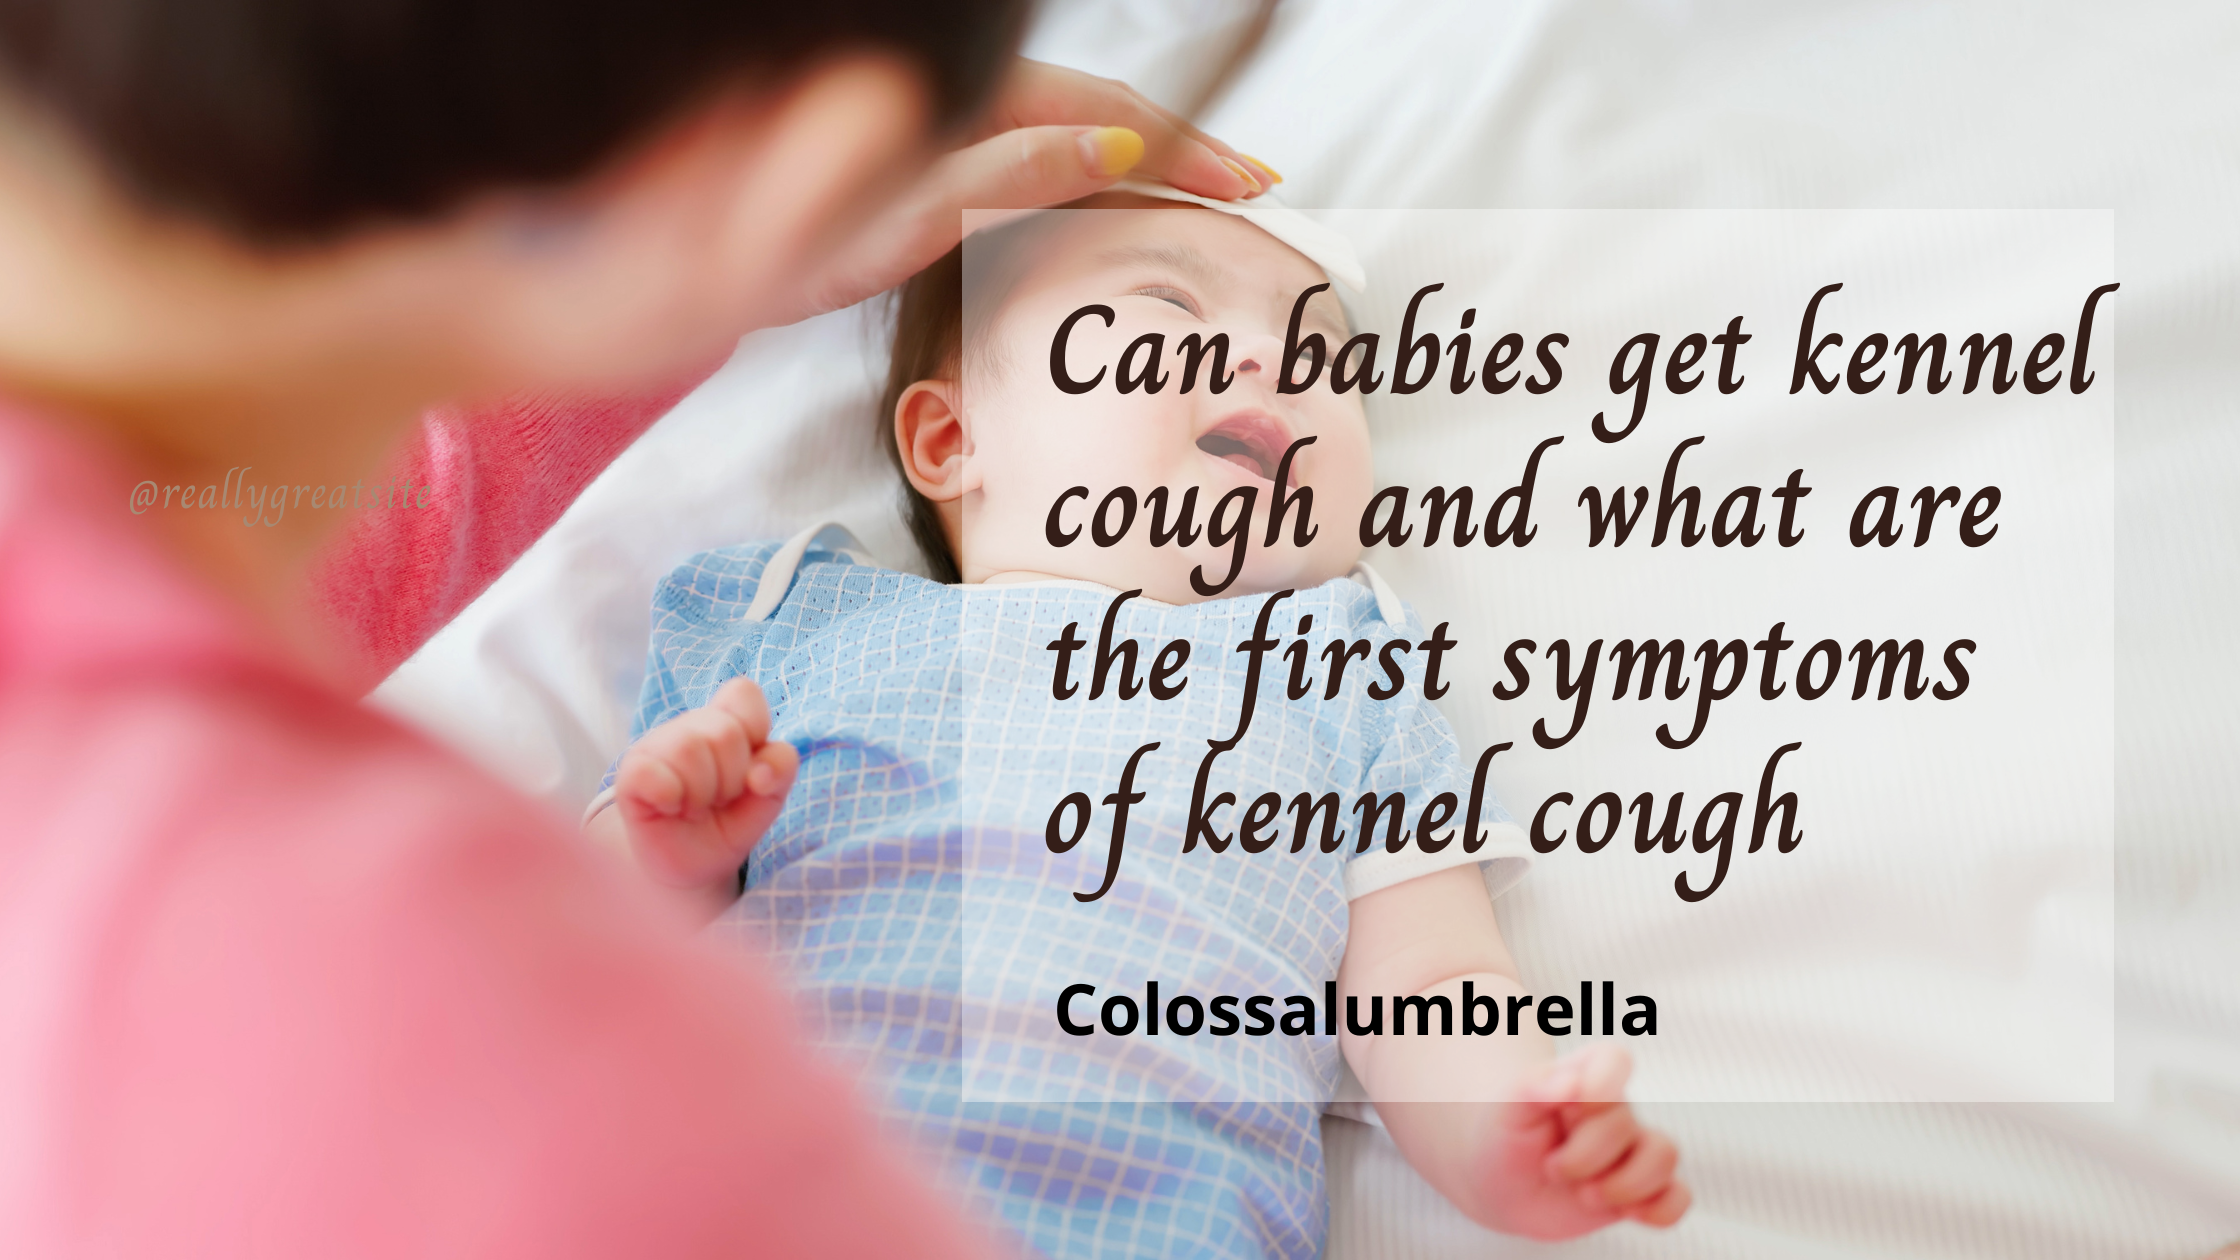 Can babies get kennel cough